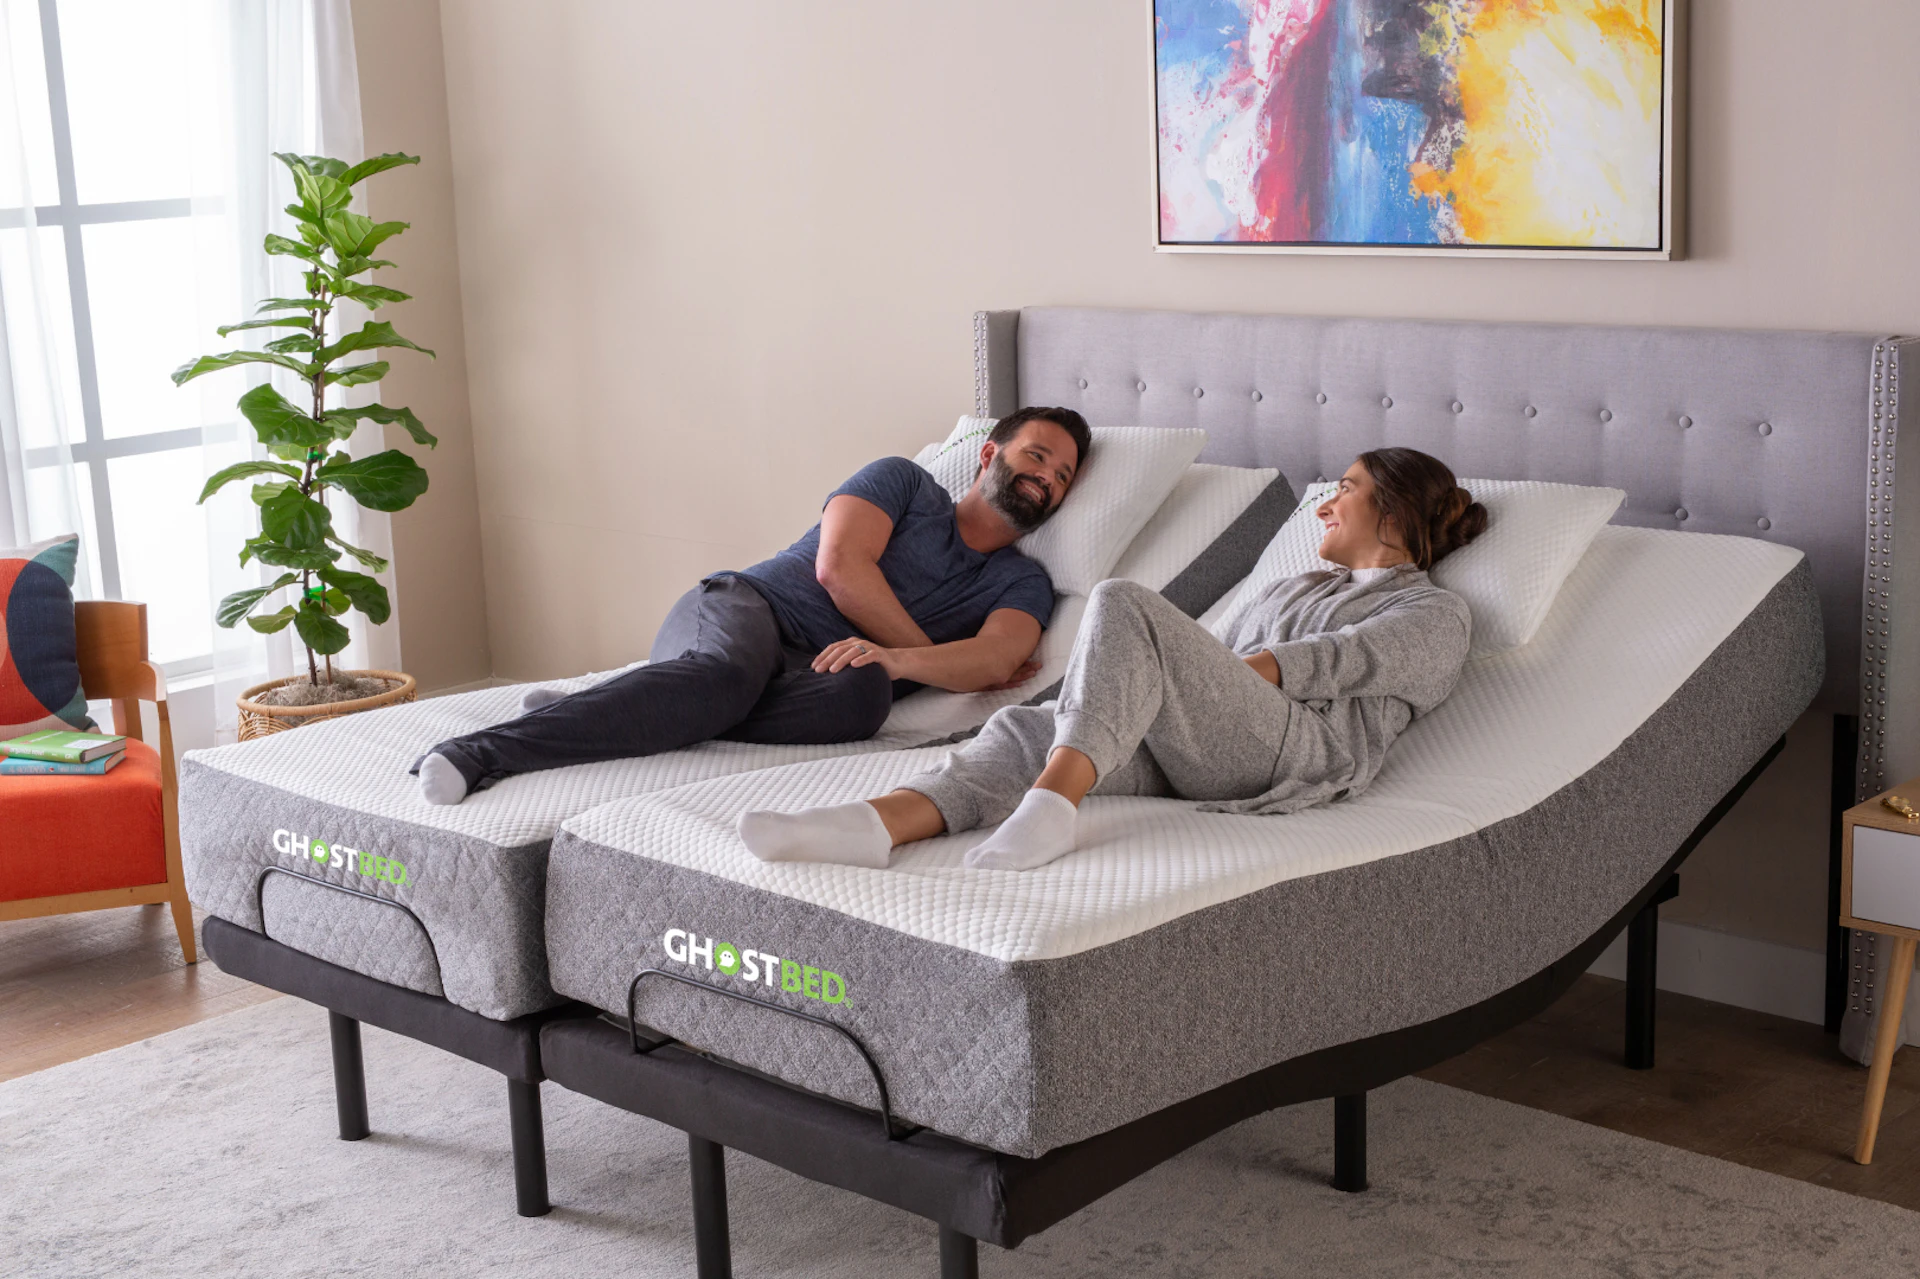 https://ghostbed-cdn.imgix.net/ghostbed-global/products/split-king/ghostbed-find-your-ideal-mattress-image.jpg?w=1920&fm=webp